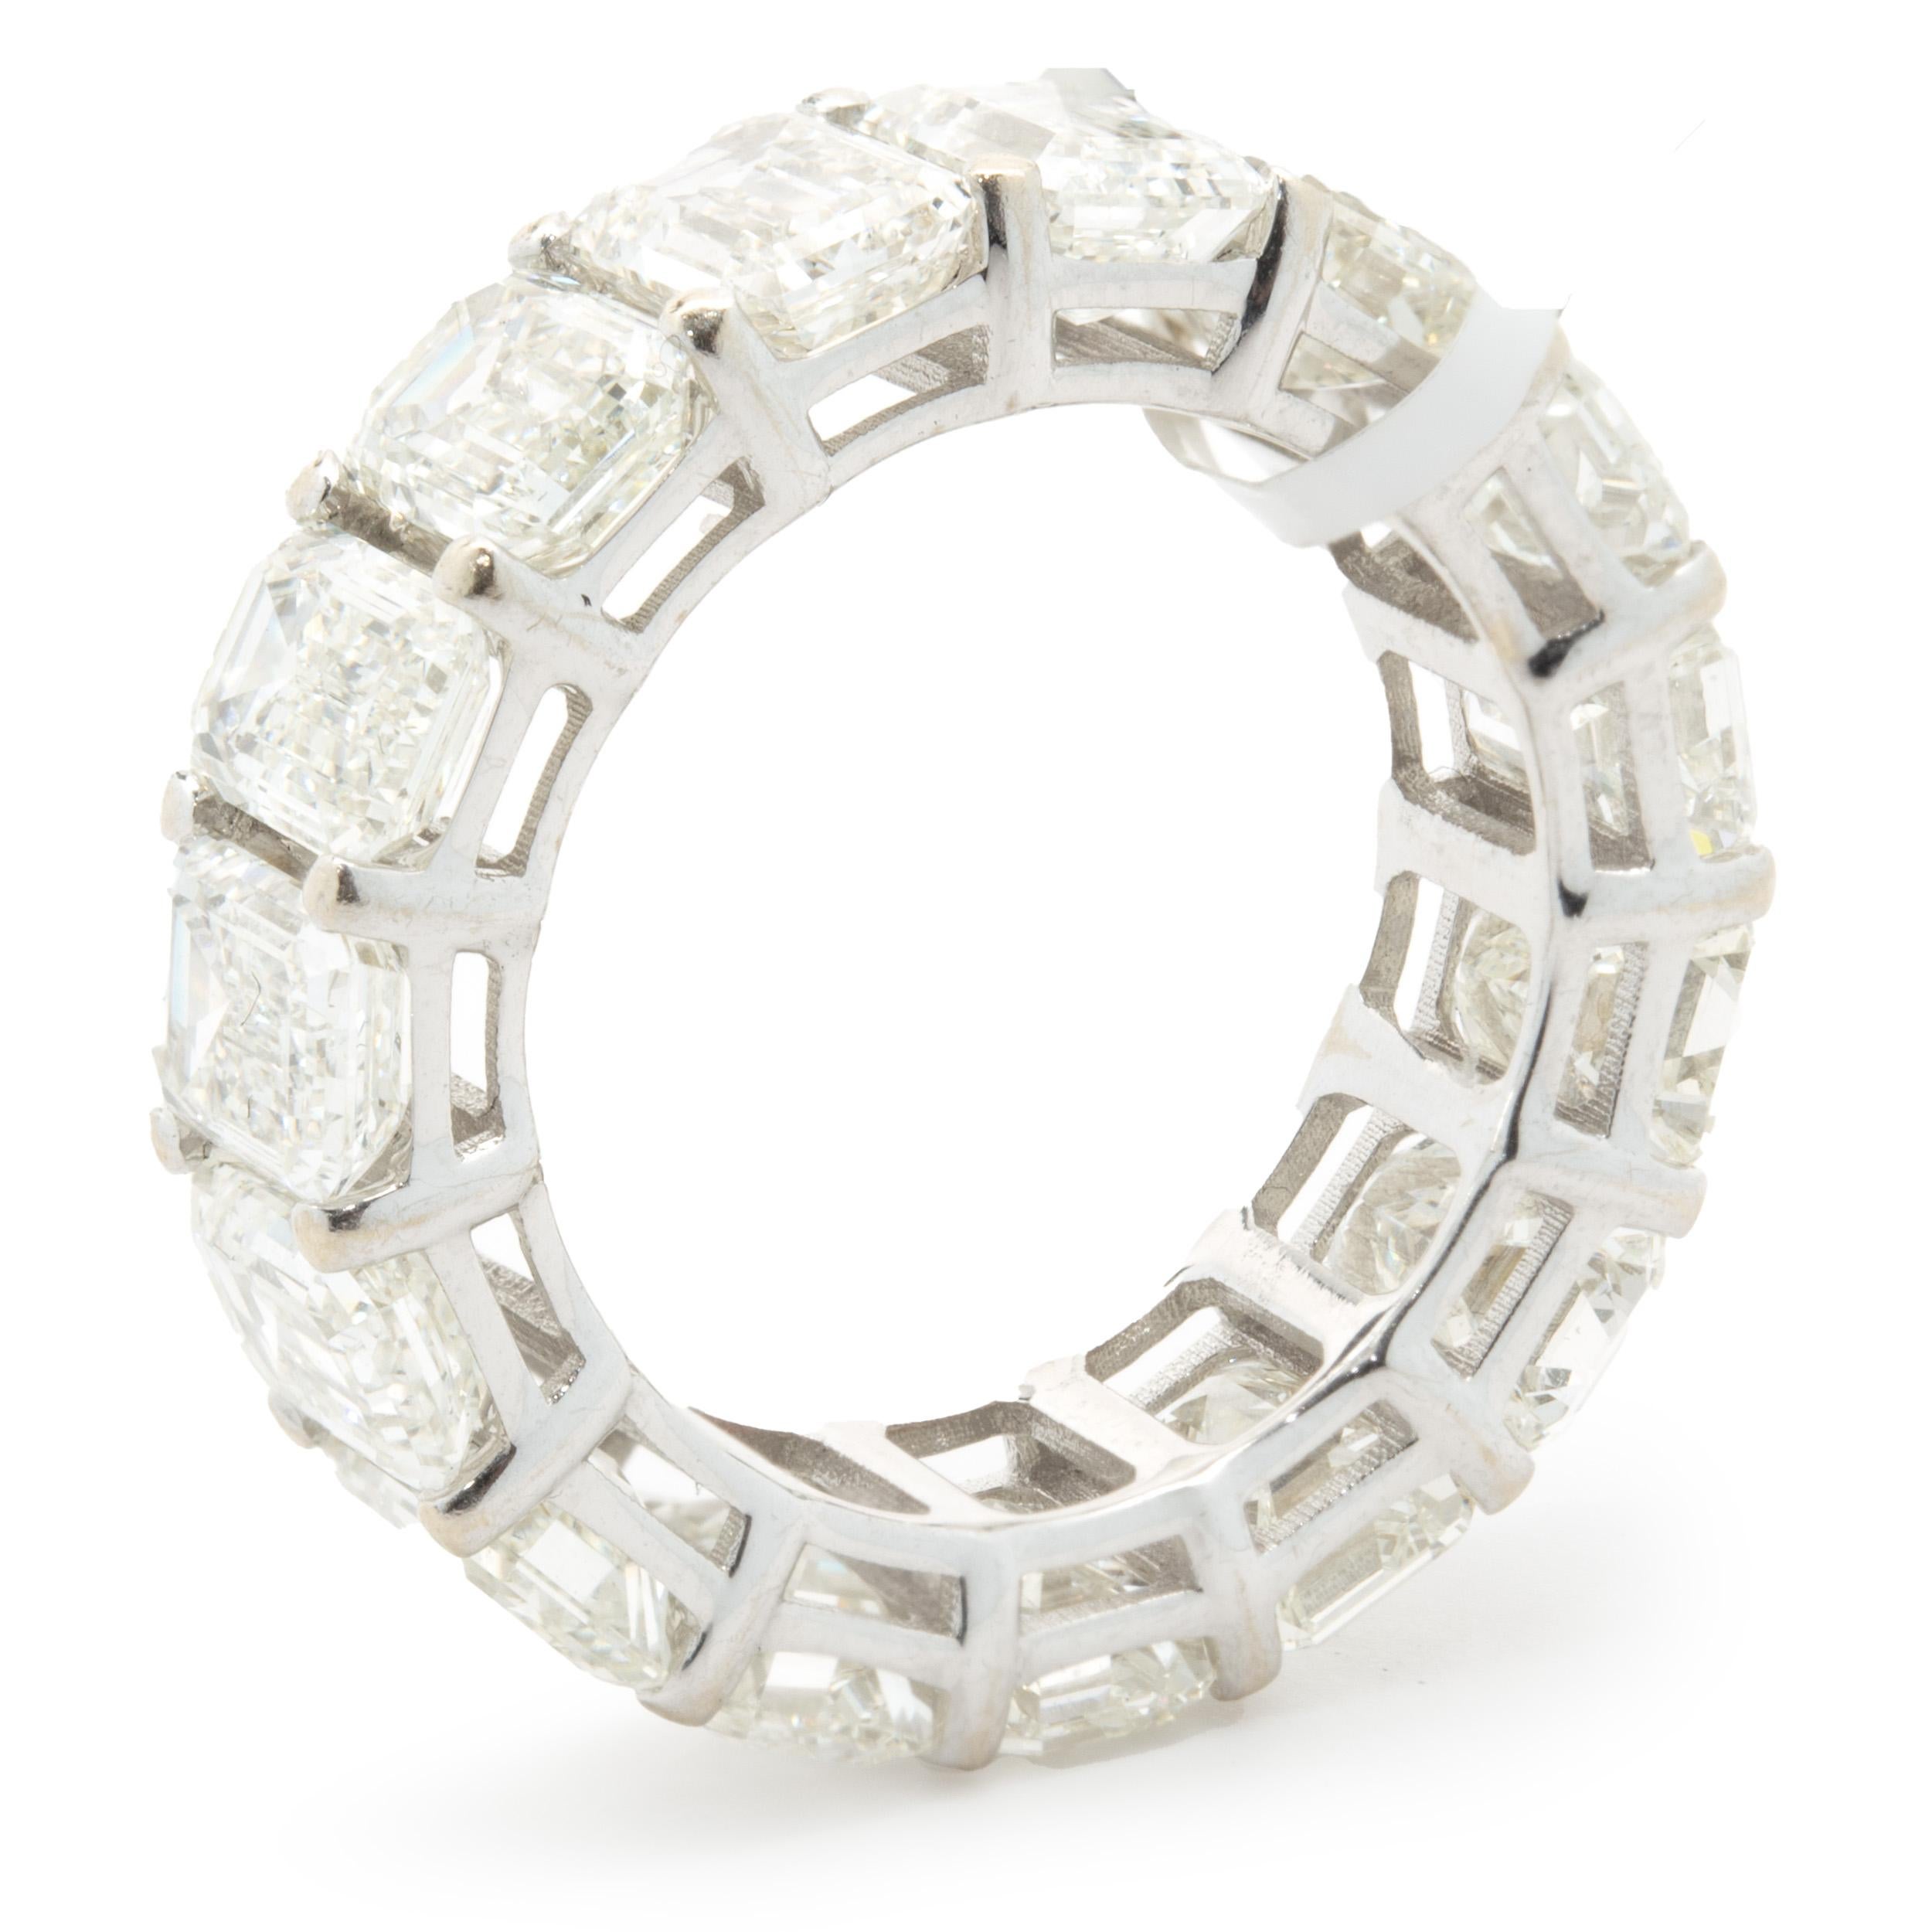 18 Karat White Gold Emerald Cut Diamond Eternity Band In Excellent Condition For Sale In Scottsdale, AZ